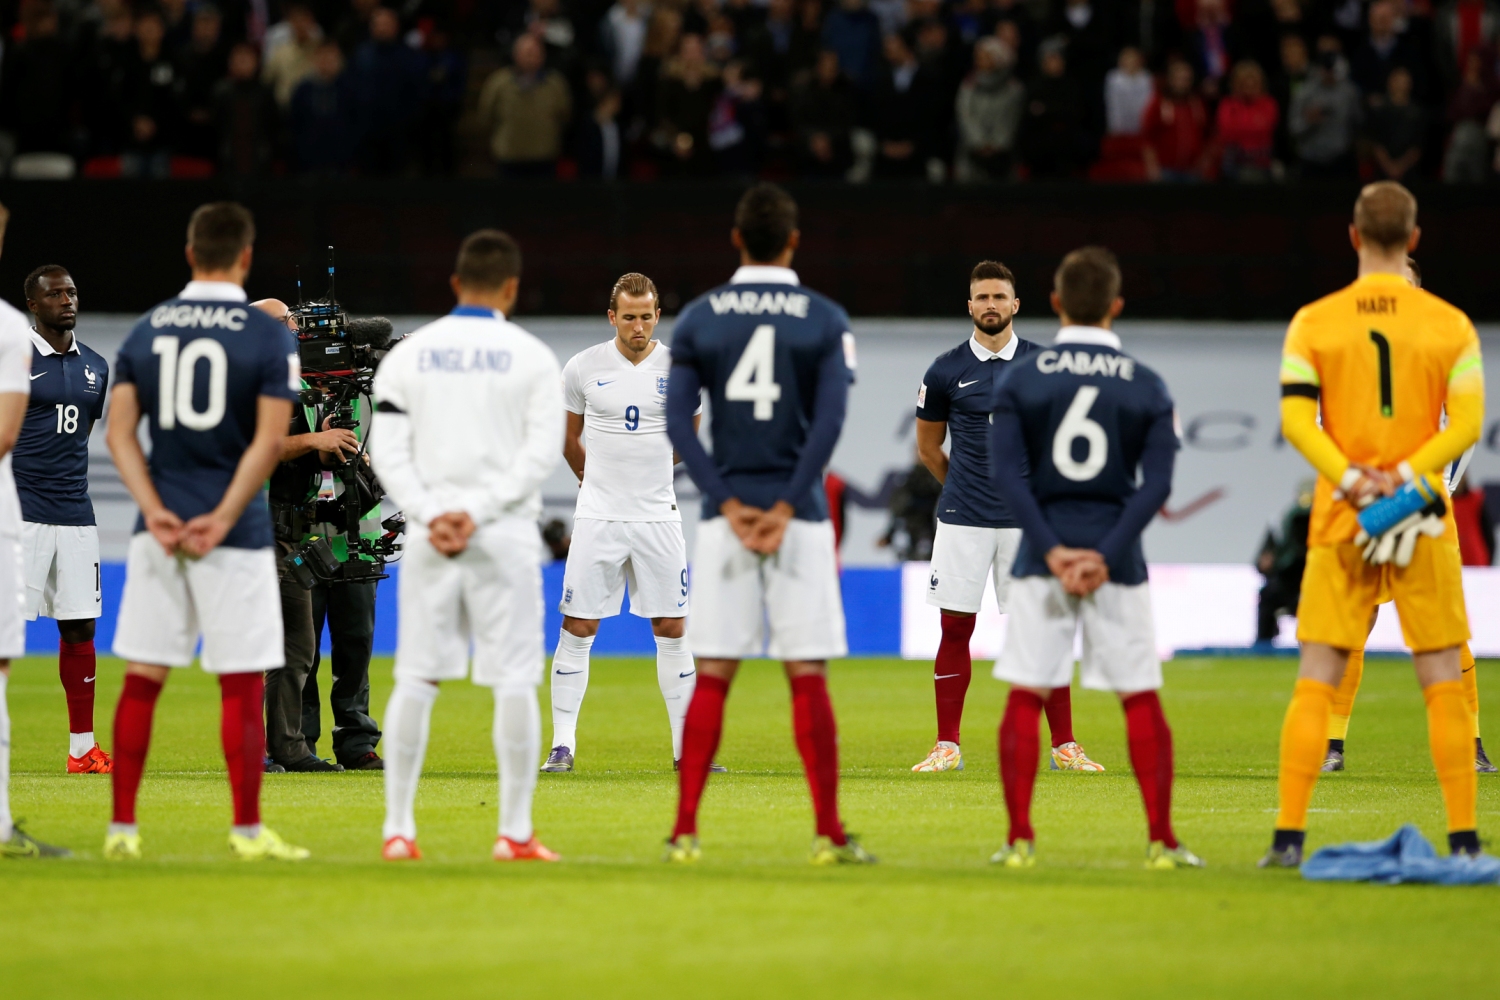 France loses at Wembley during a game in which football wasn’t important